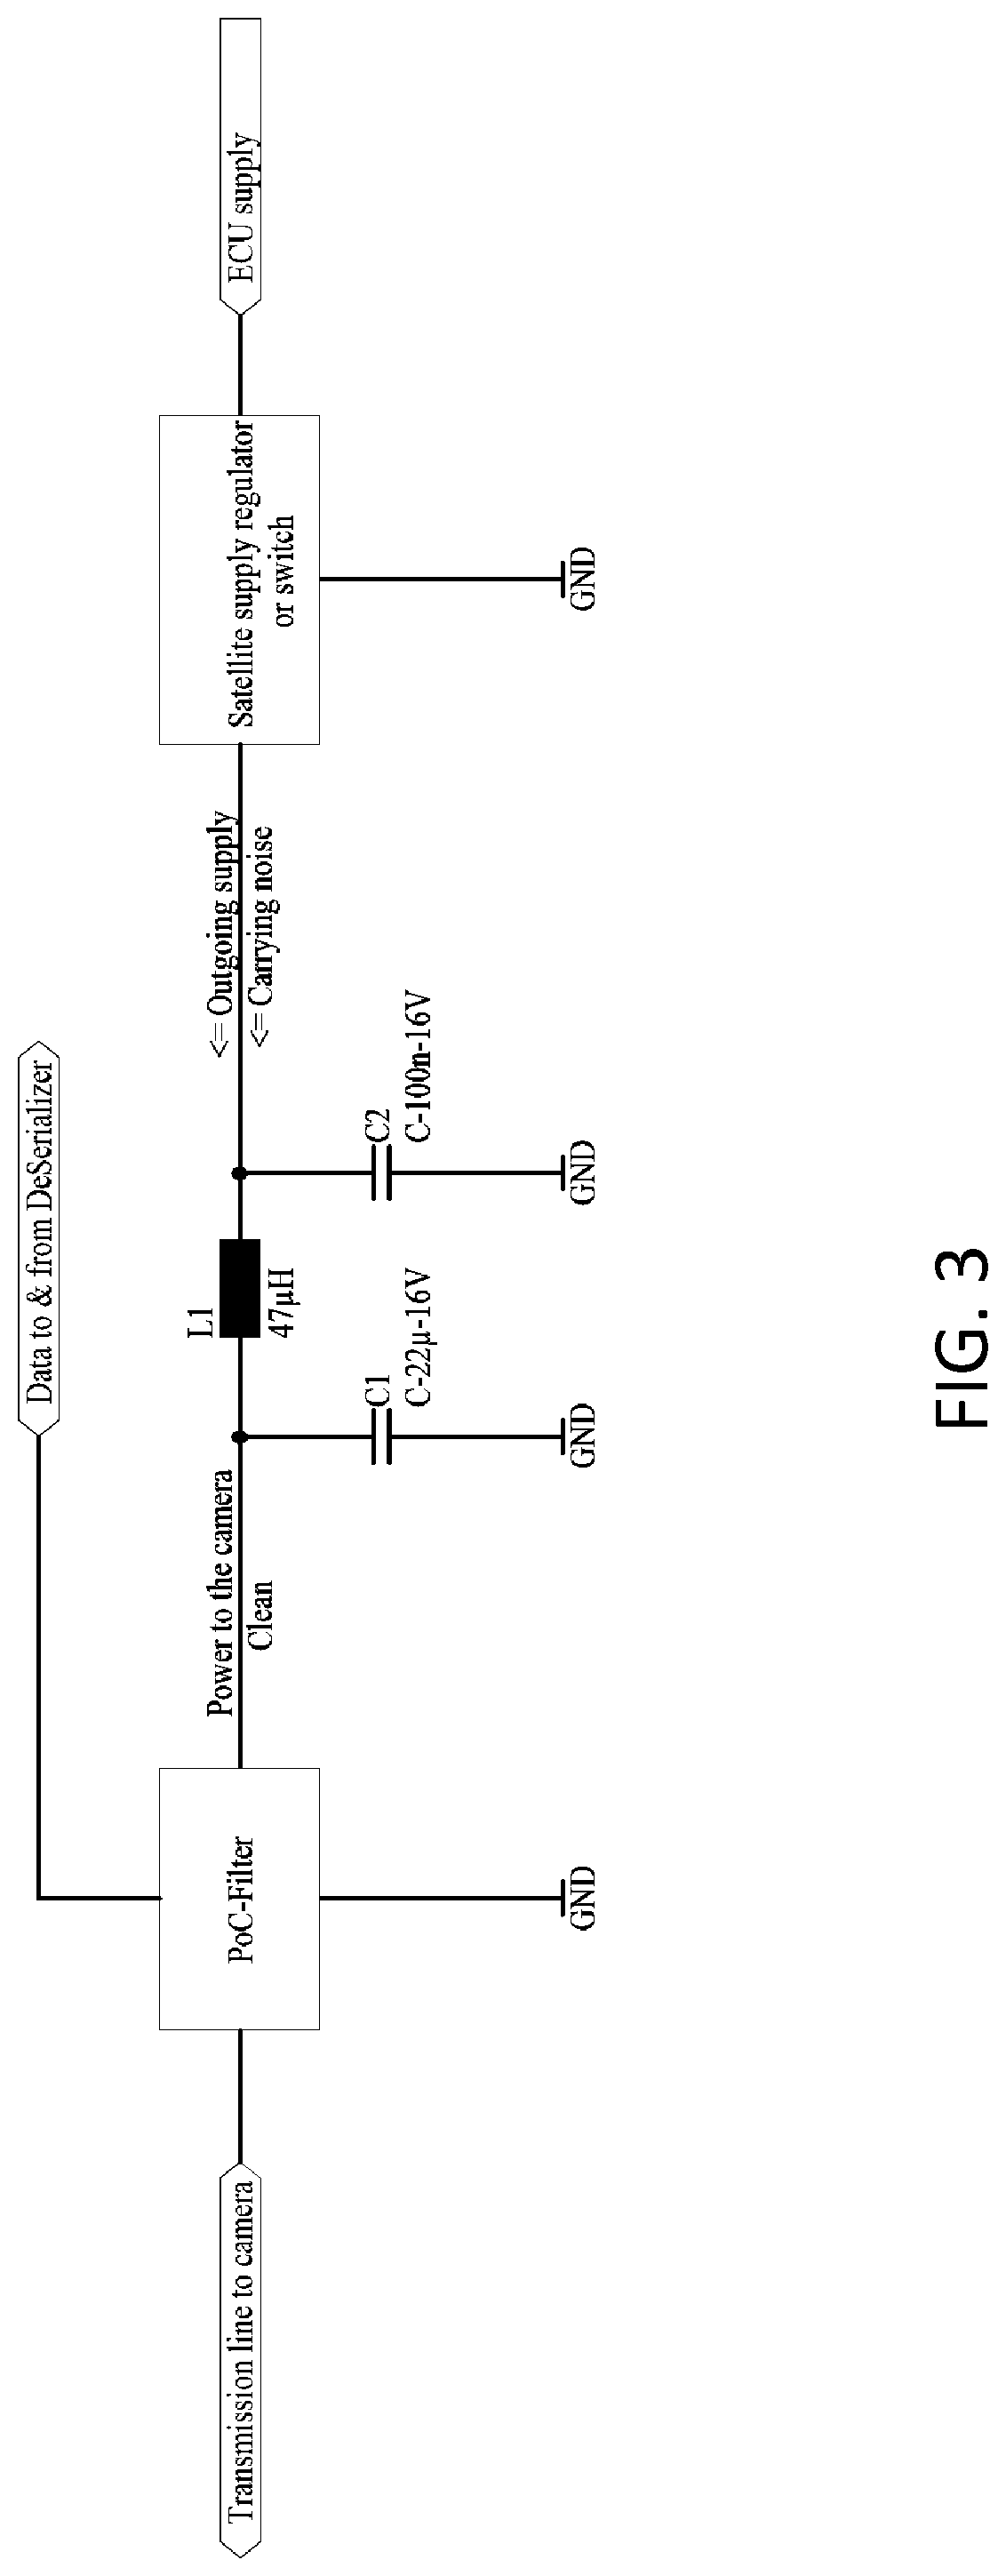 Vehicle vision system with camera line power filter